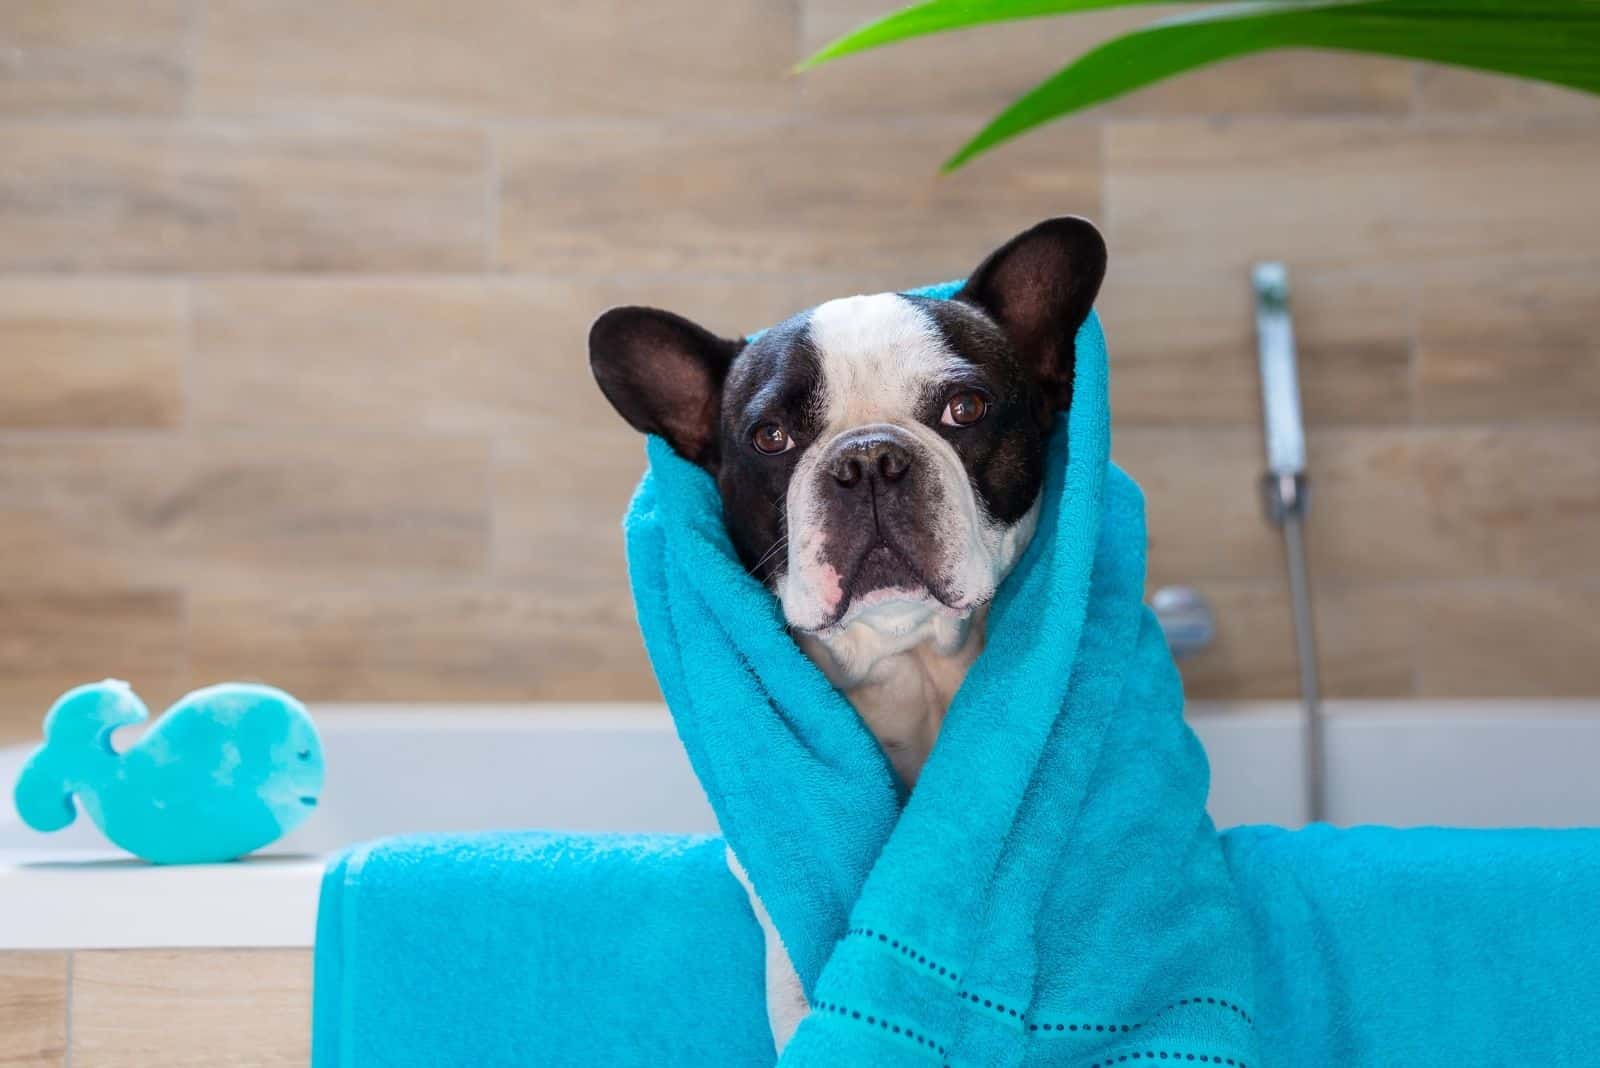 lovely french bulldog on blue towel after bathing in the tub